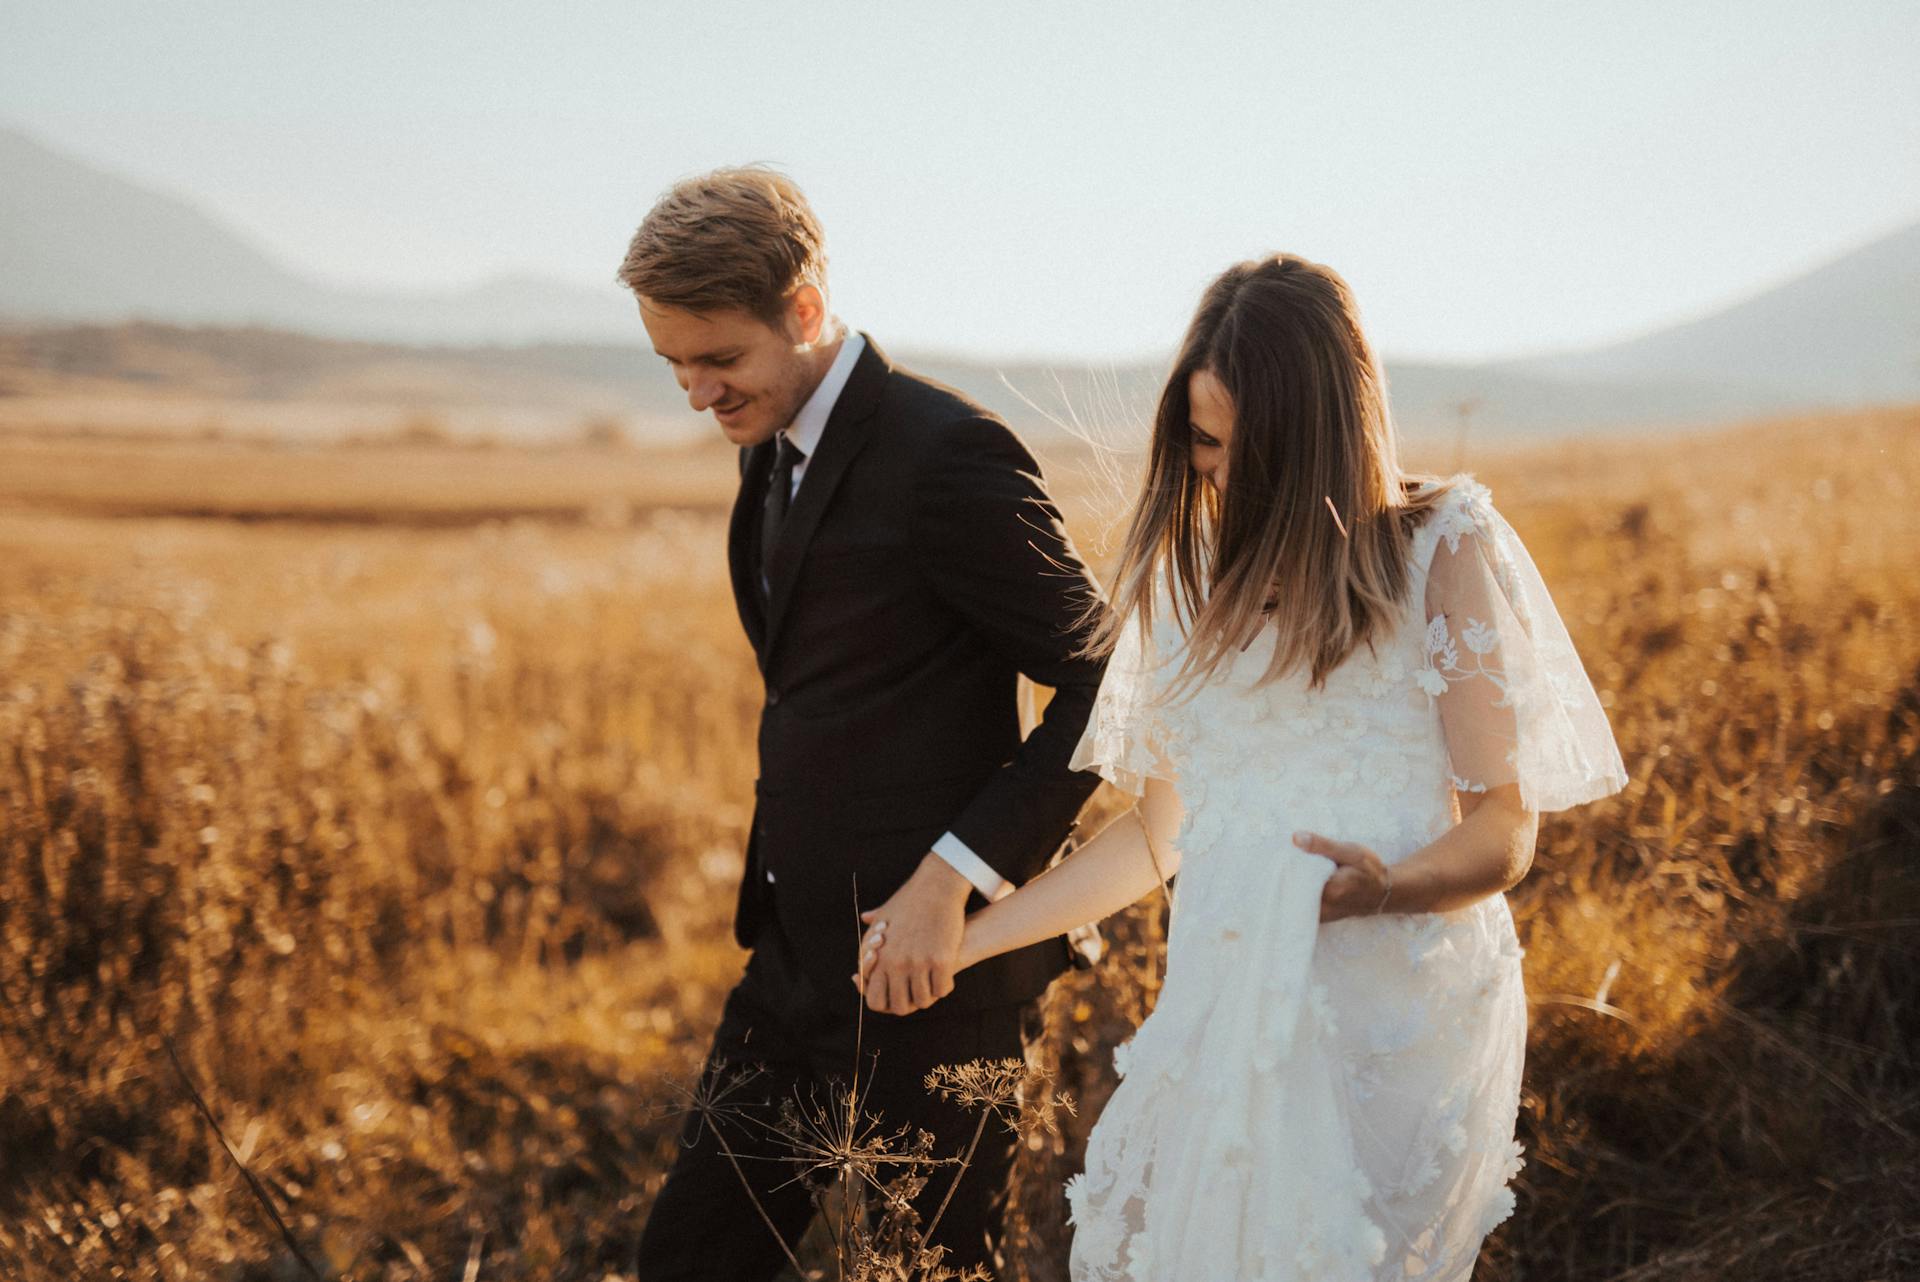 A married couple in a field | Source: Pexels